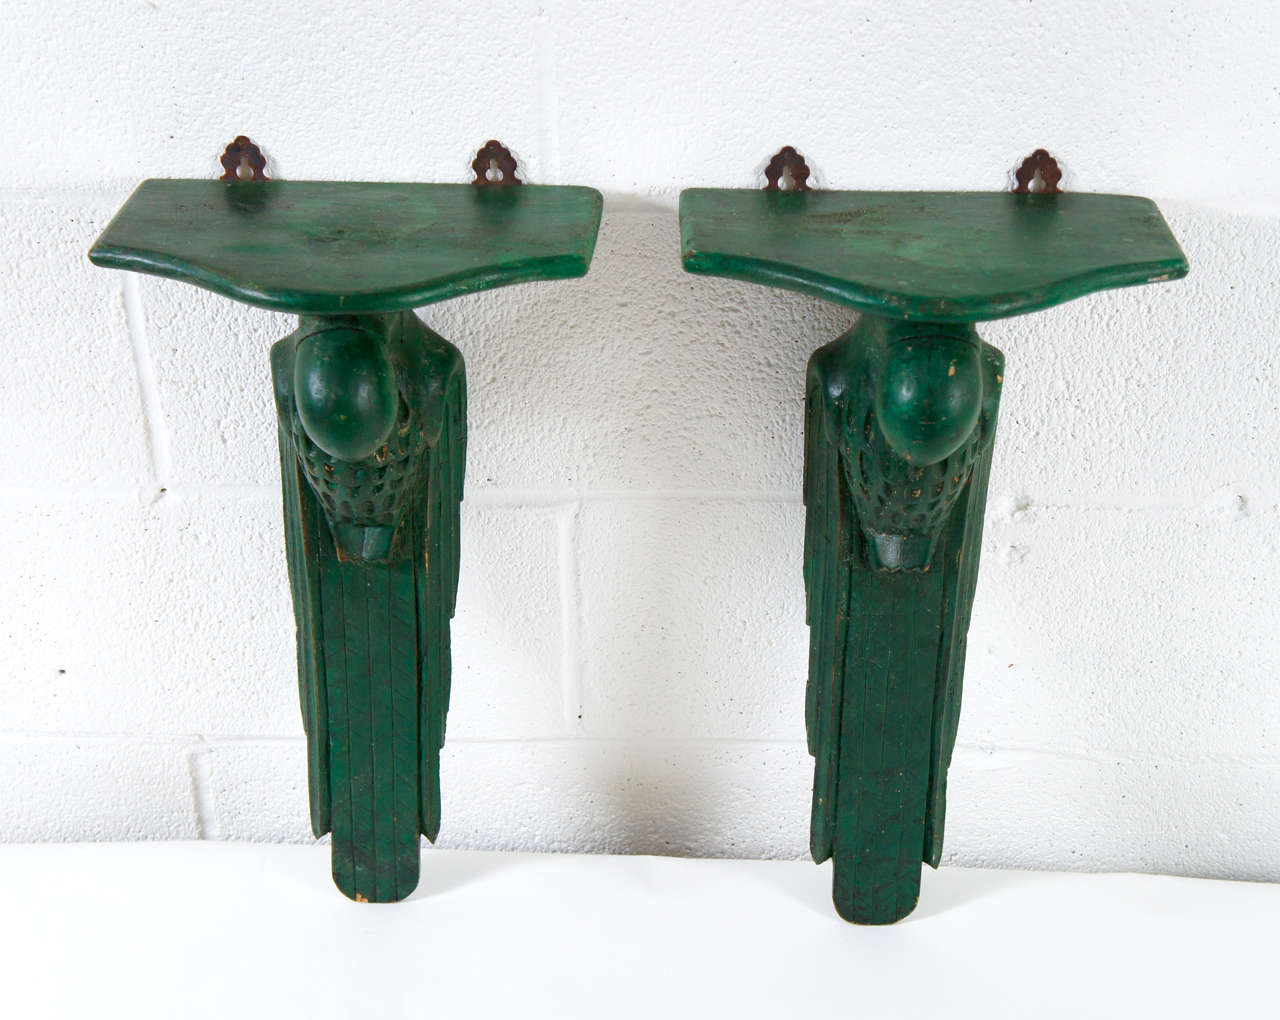 Here is a charming pair of green parrot wall brackets.